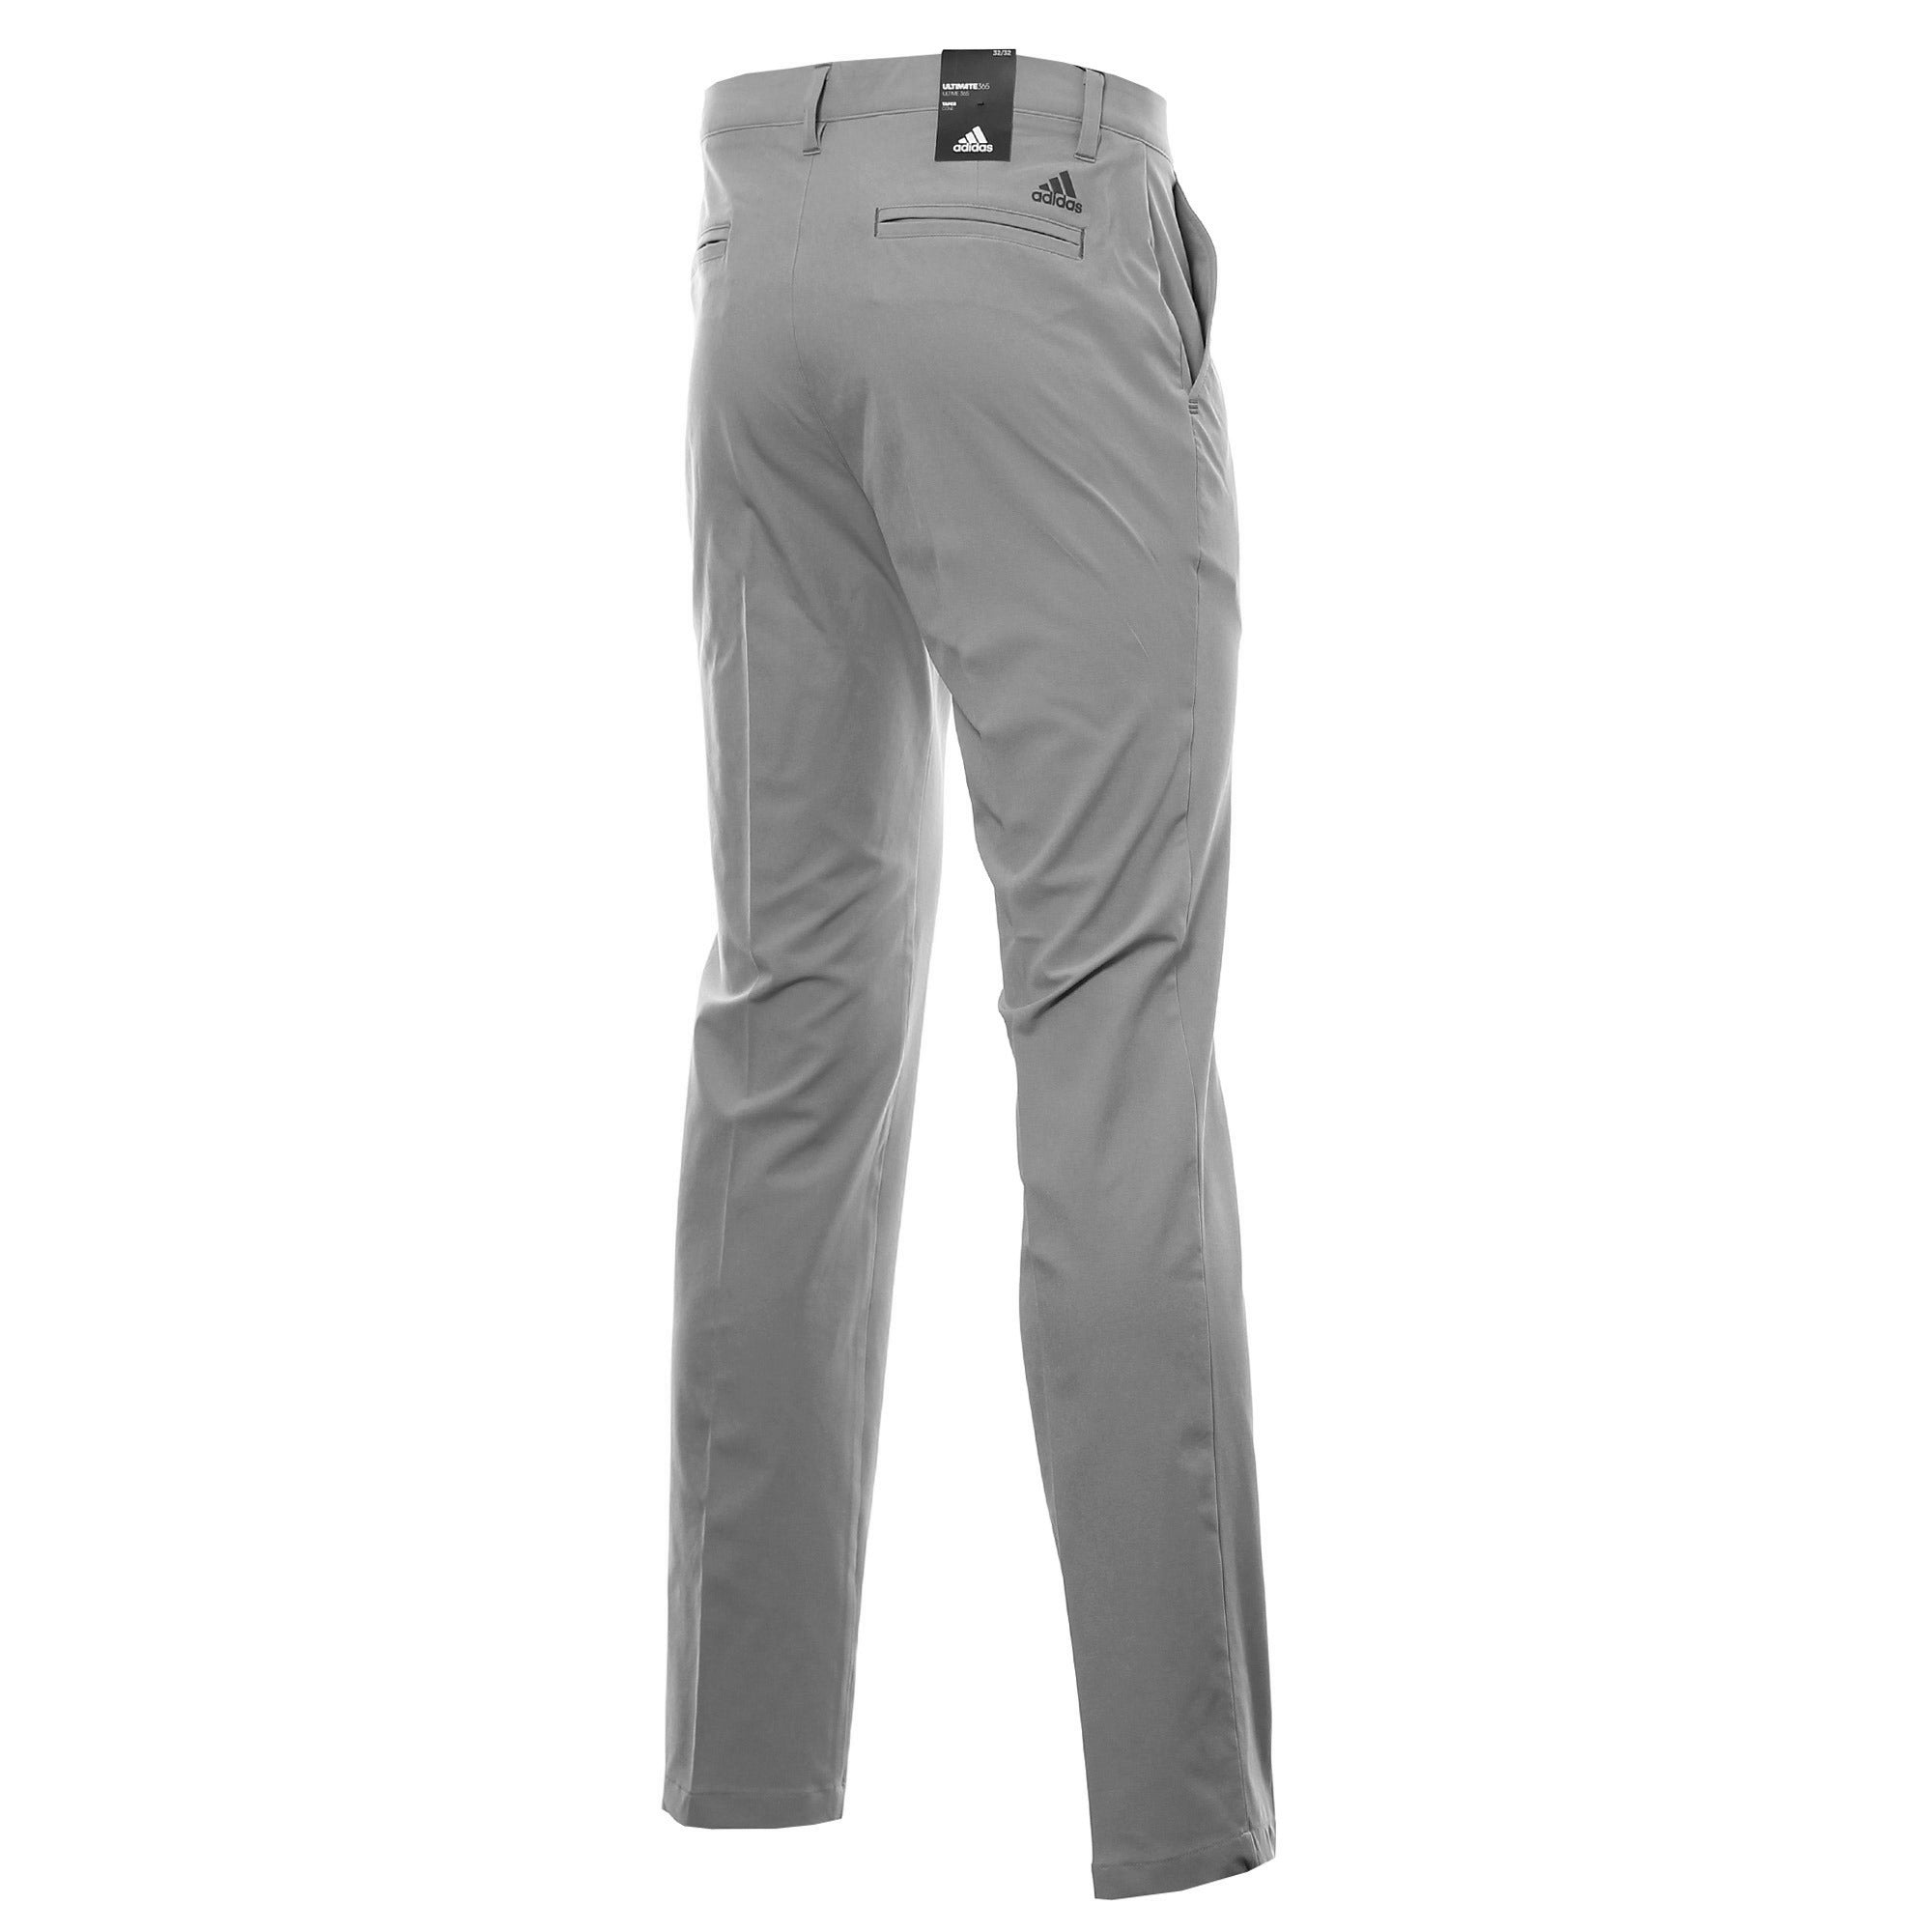 adidas ultimate 365 golf pants review